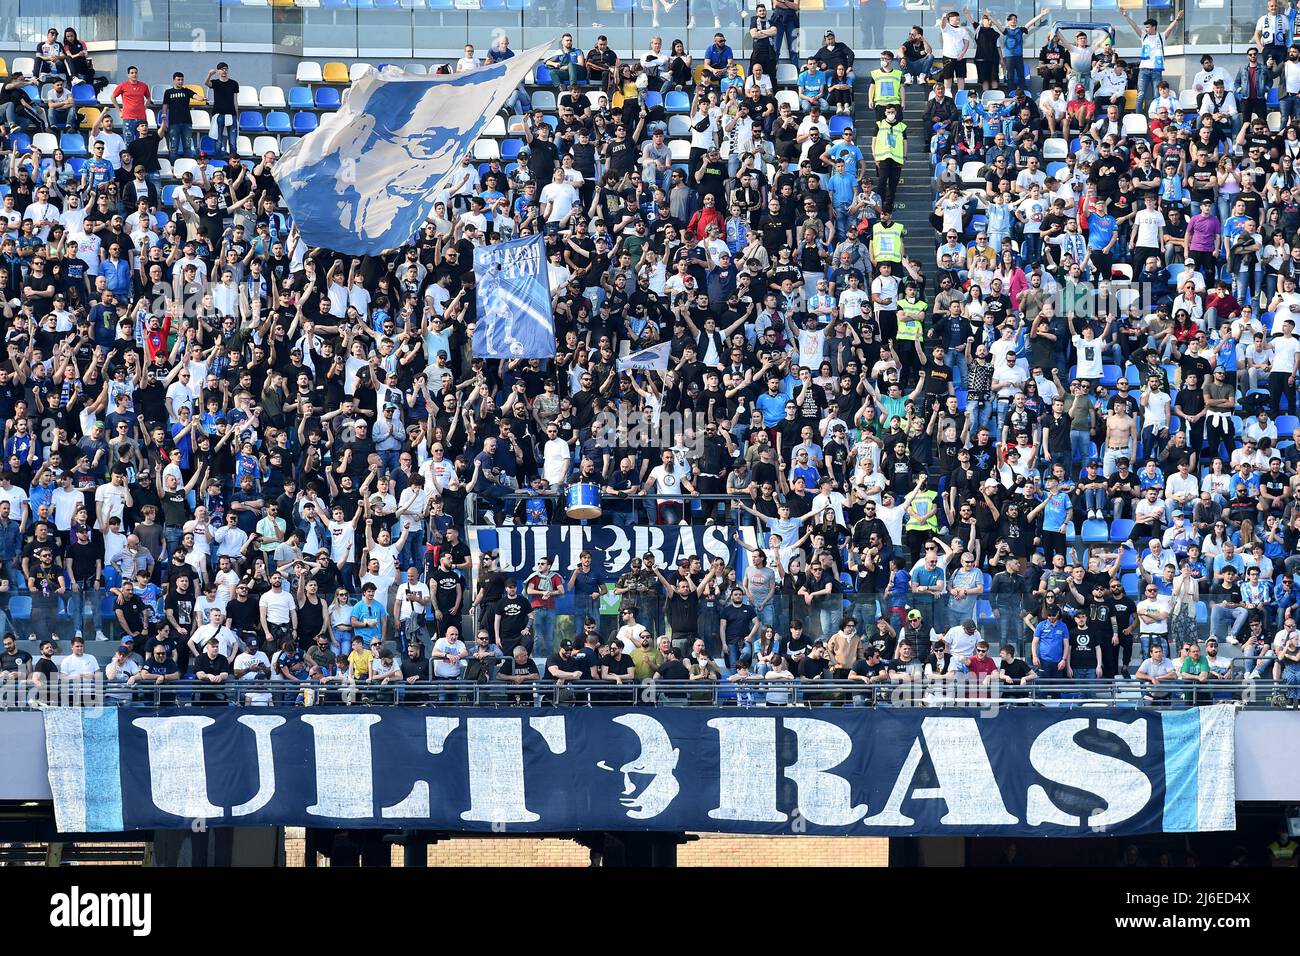 Naples, Italy. 30 Apr, 2022. SSC Napoli Supporters during the Serie A match  between SSC Napoli and US Sassuolo Calcio Credit:Franco Romano/Alamy Live  News Stock Photo - Alamy